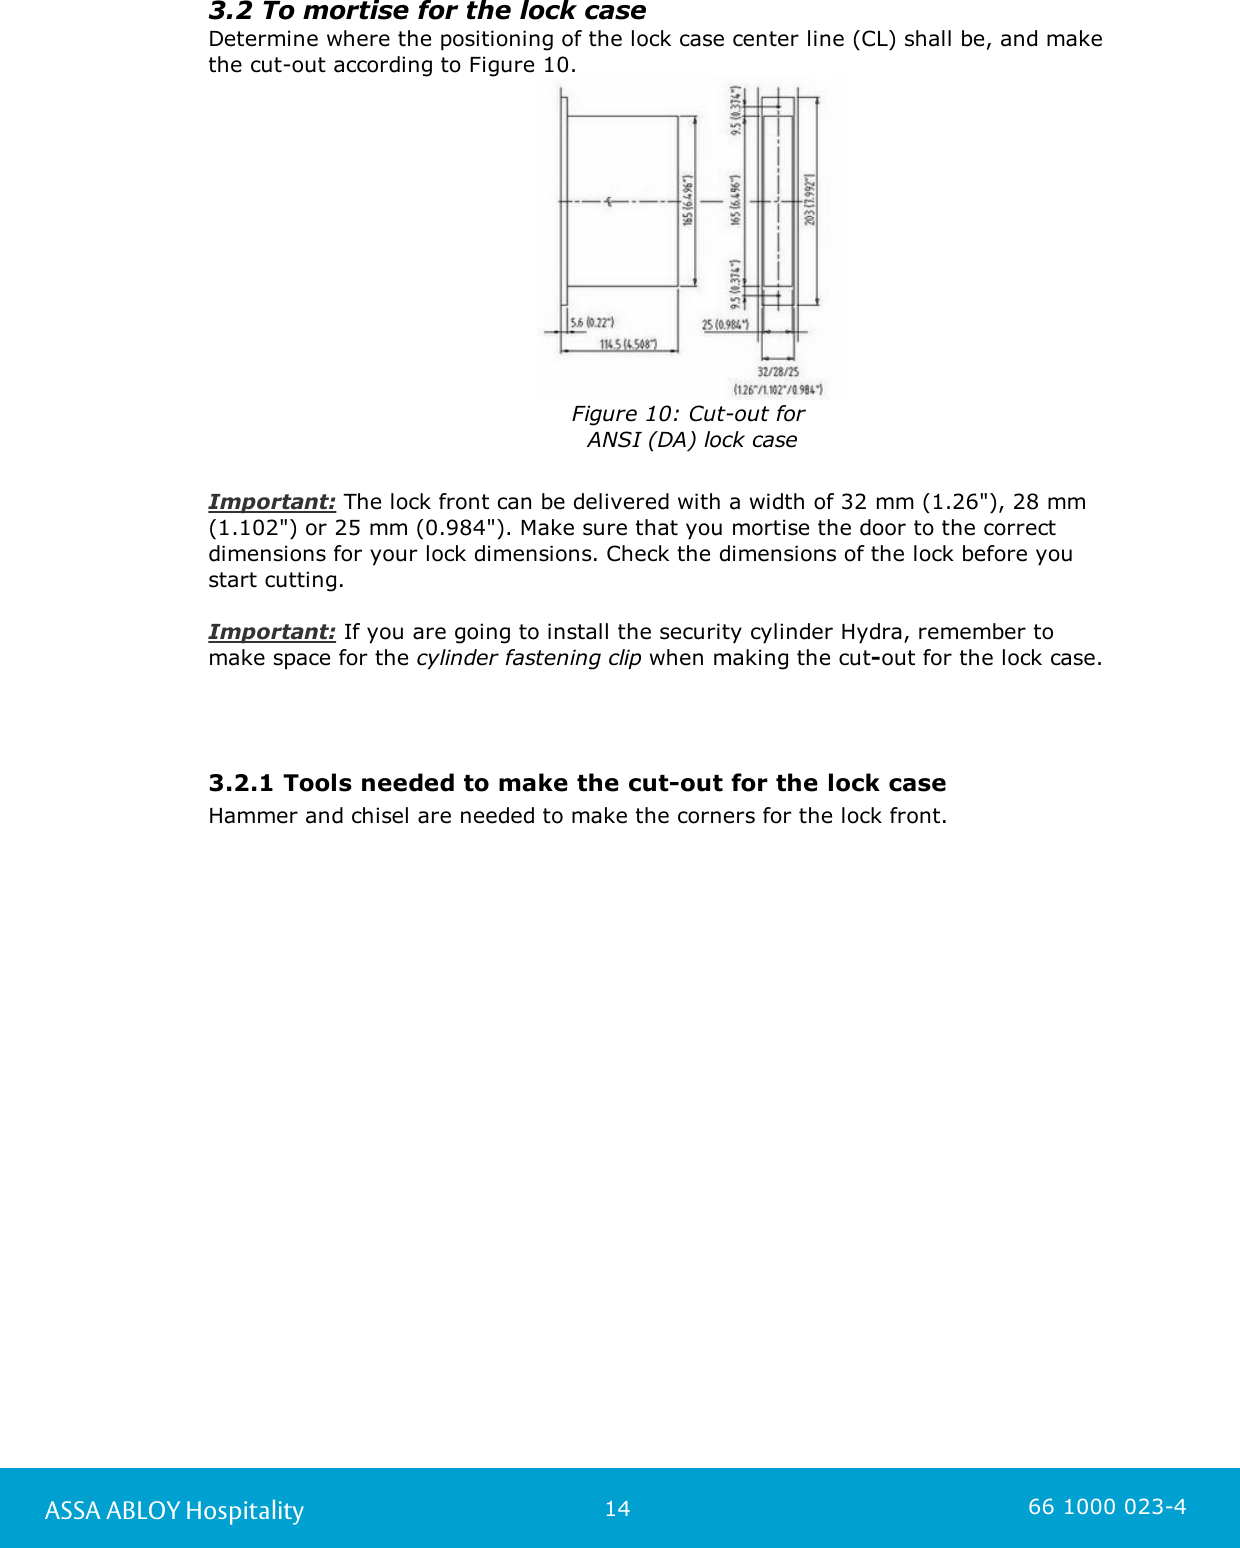 14ASSA ABLOY Hospitality 66 1000 023-43.2 To mortise for the lock caseDetermine where the positioning of the lock case center line (CL) shall be, and makethe cut-out according to Figure 10.                    Figure 10: Cut-out for ANSI (DA) lock caseImportant: The lock front can be delivered with a width of 32 mm (1.26&quot;), 28 mm (1.102&quot;) or 25 mm (0.984&quot;). Make sure that you mortise the door to the correctdimensions for your lock dimensions. Check the dimensions of the lock before you start cutting.Important: If you are going to install the security cylinder Hydra, remember to make space for the cylinder fastening clip when making the cut-out for the lock case.  3.2.1 Tools needed to make the cut-out for the lock caseHammer and chisel are needed to make the corners for the lock front.